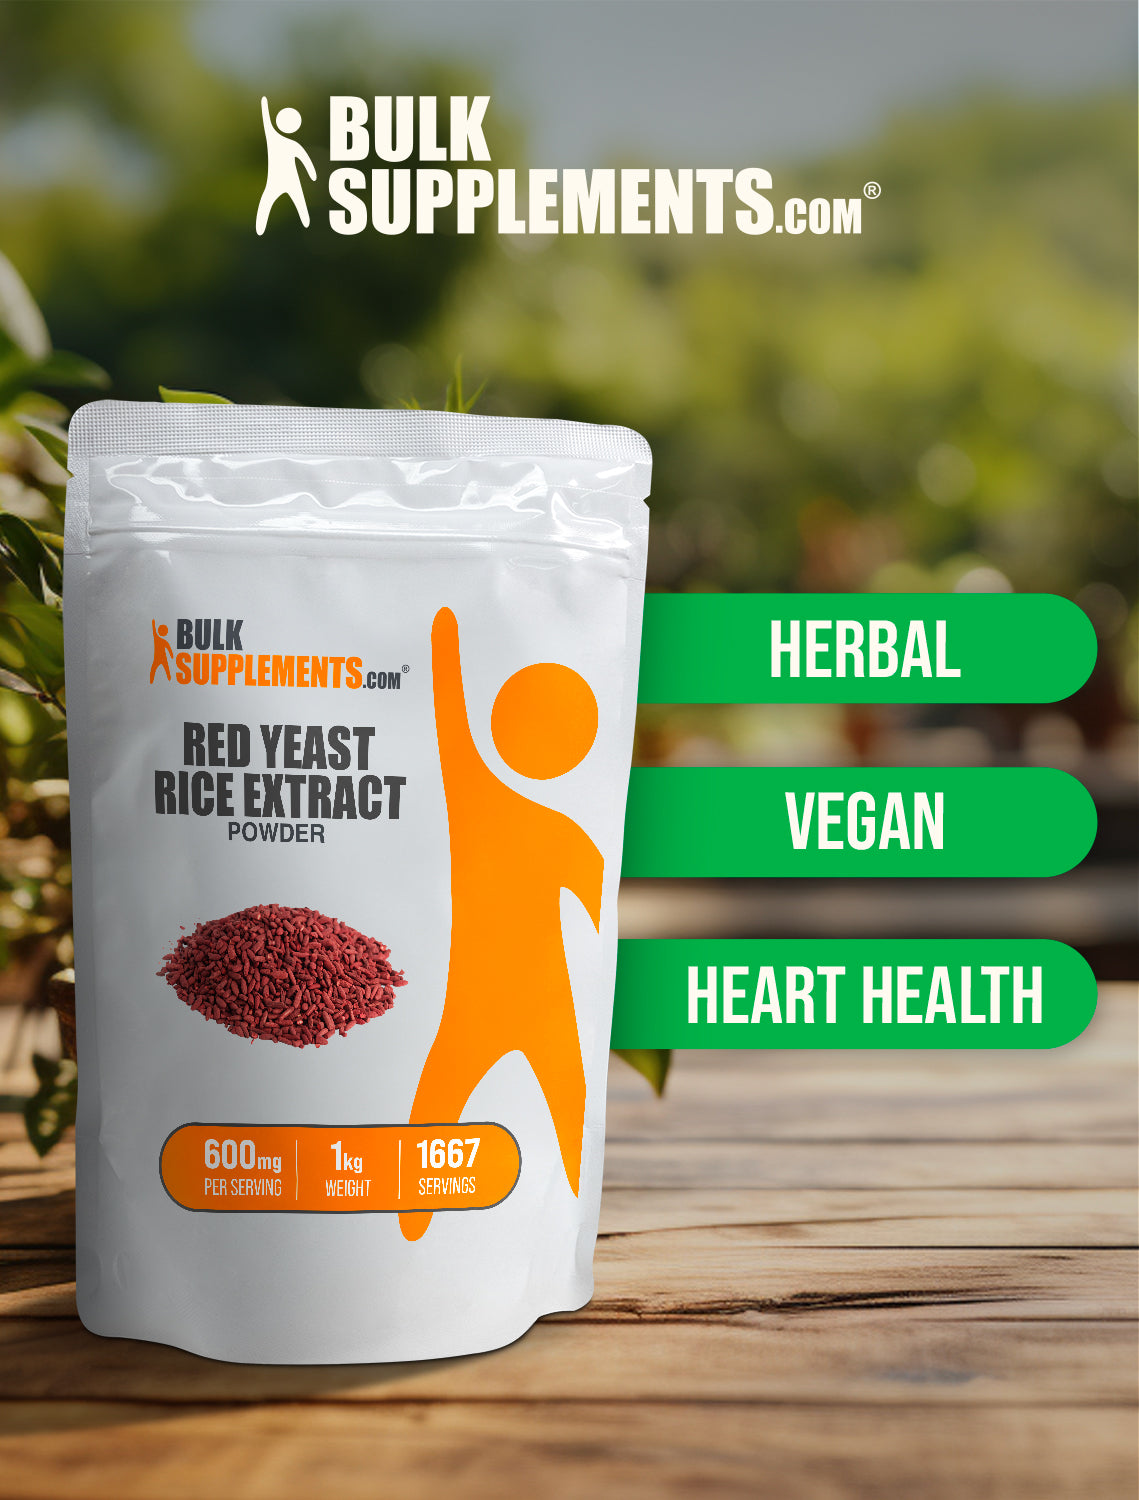 Red Yeast Rice Extract powder keyword image 1kg